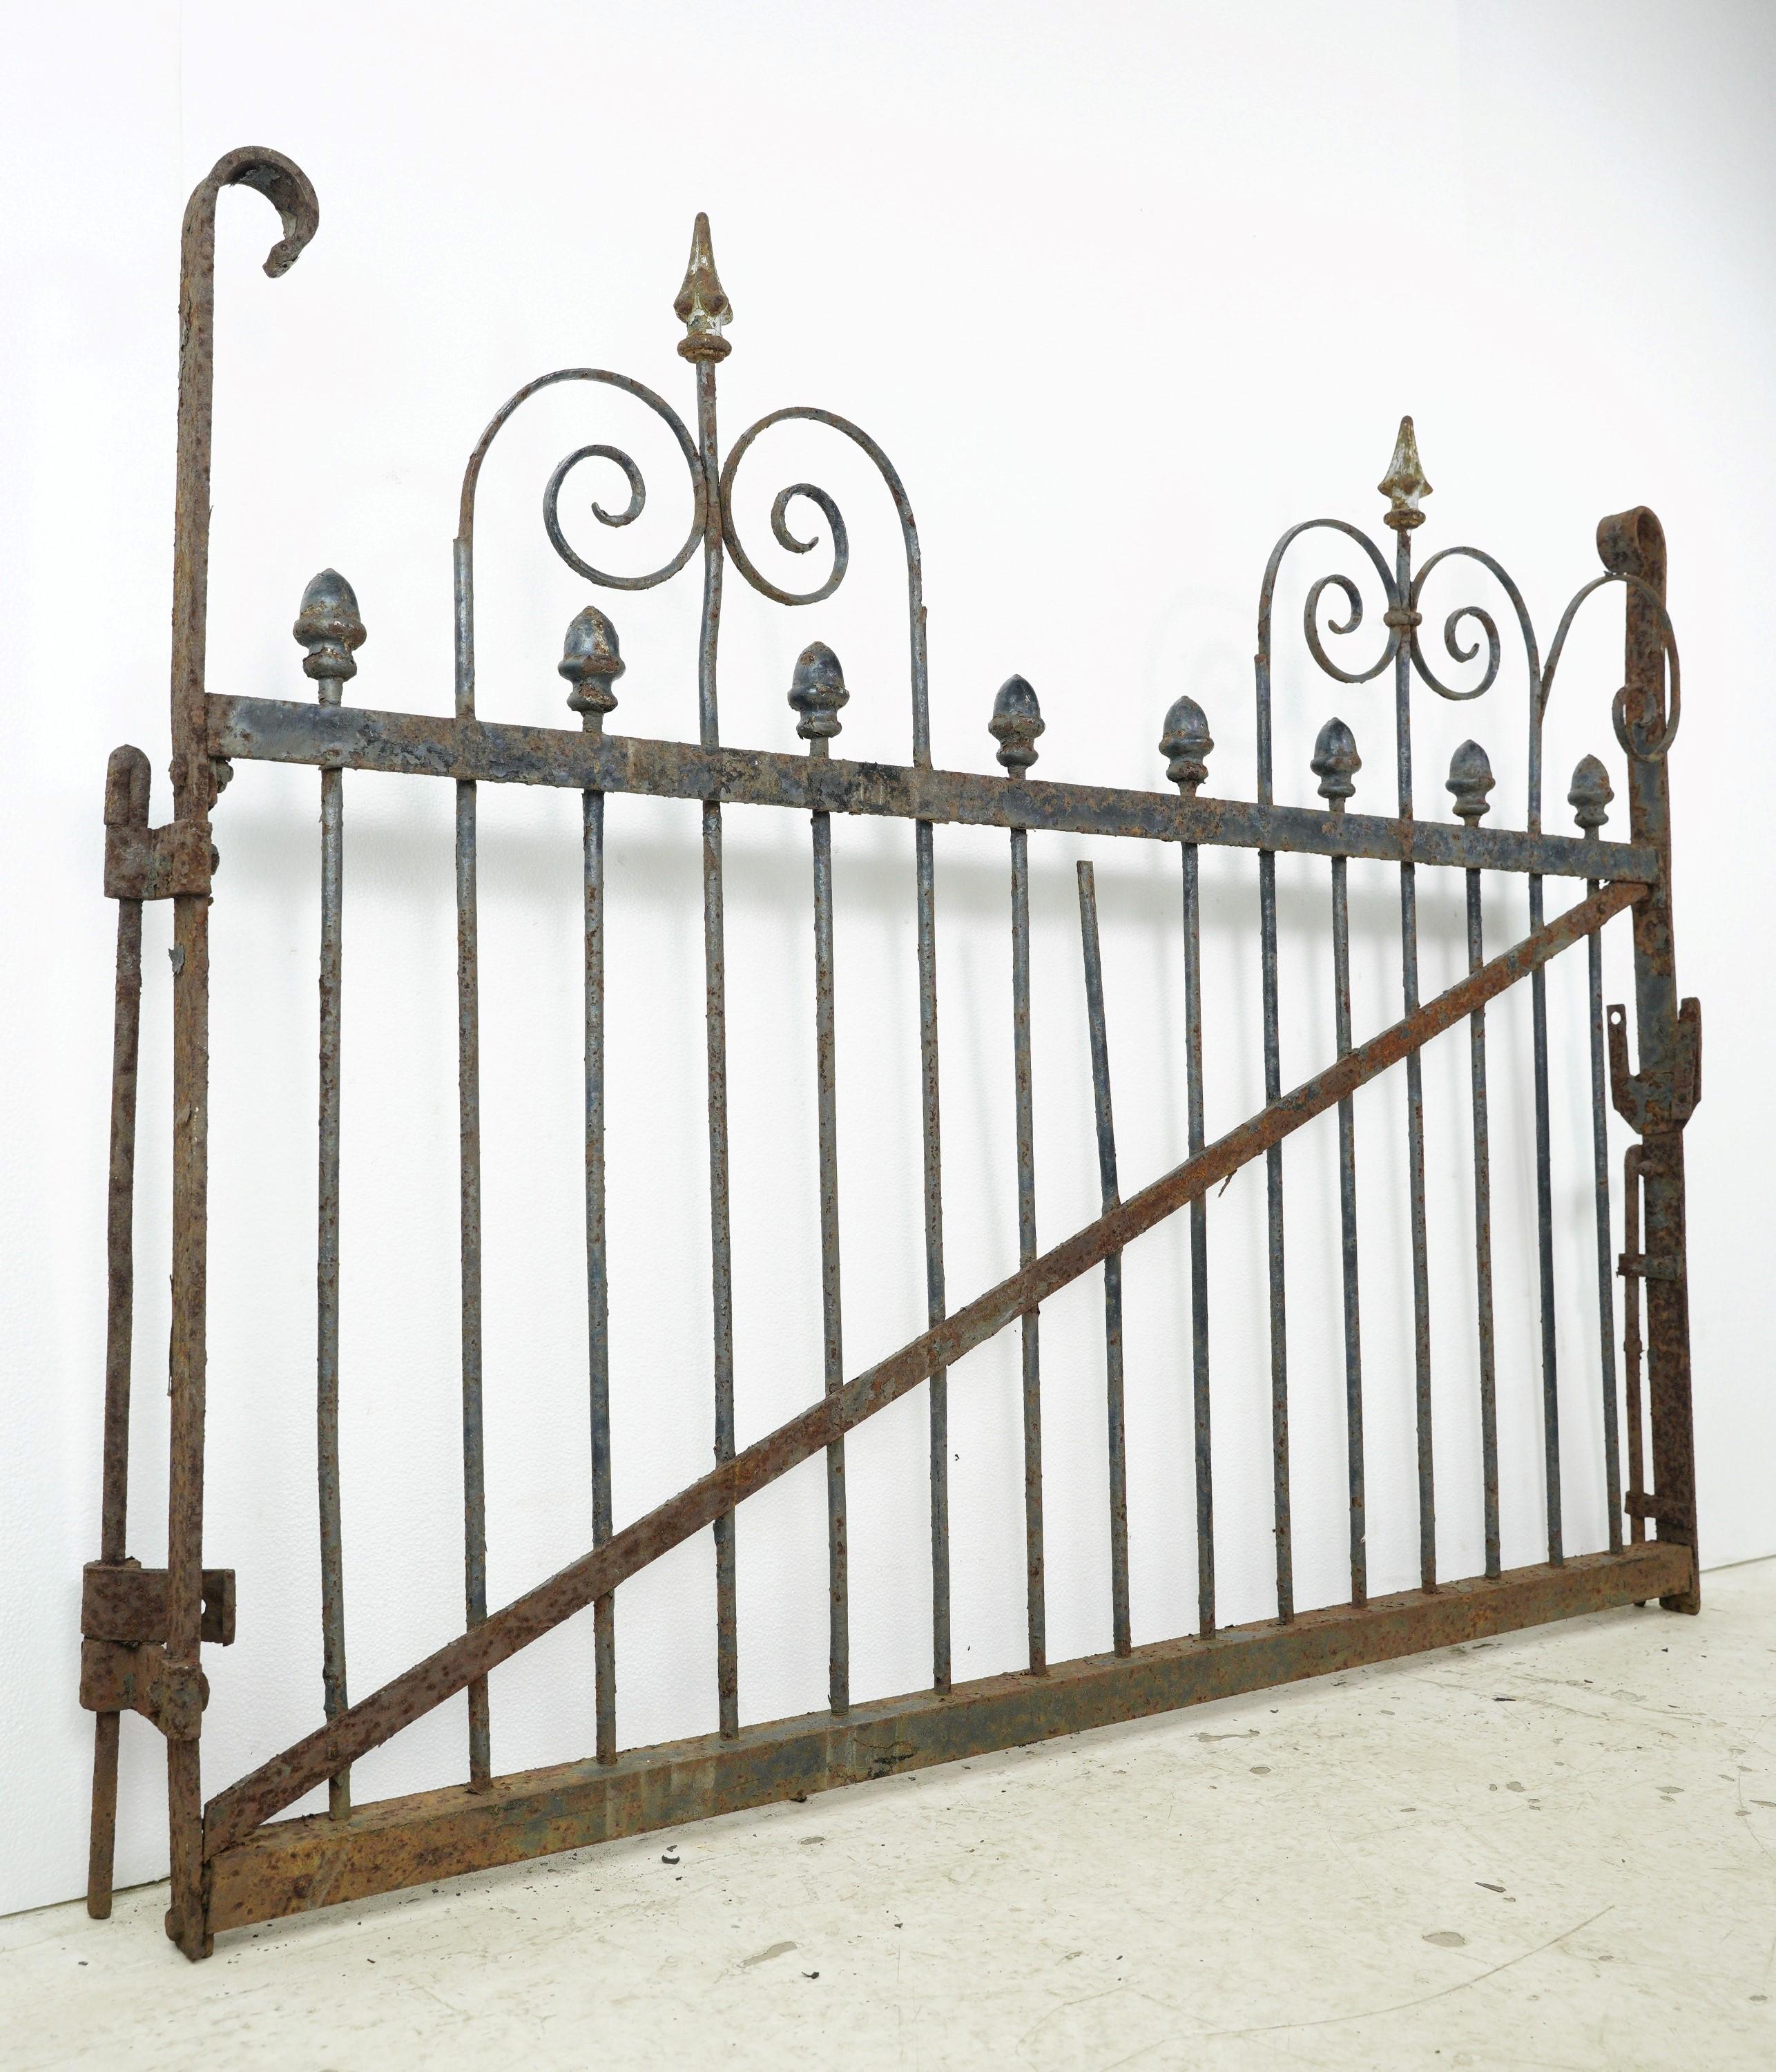 Wrought iron scrolls and cast iron spears and finials make up this charming gate. Install it as a stylish decorative piece or as a functional privacy barrier. This is in fair condition, with surface wear and missing elements. Many iron gates can be